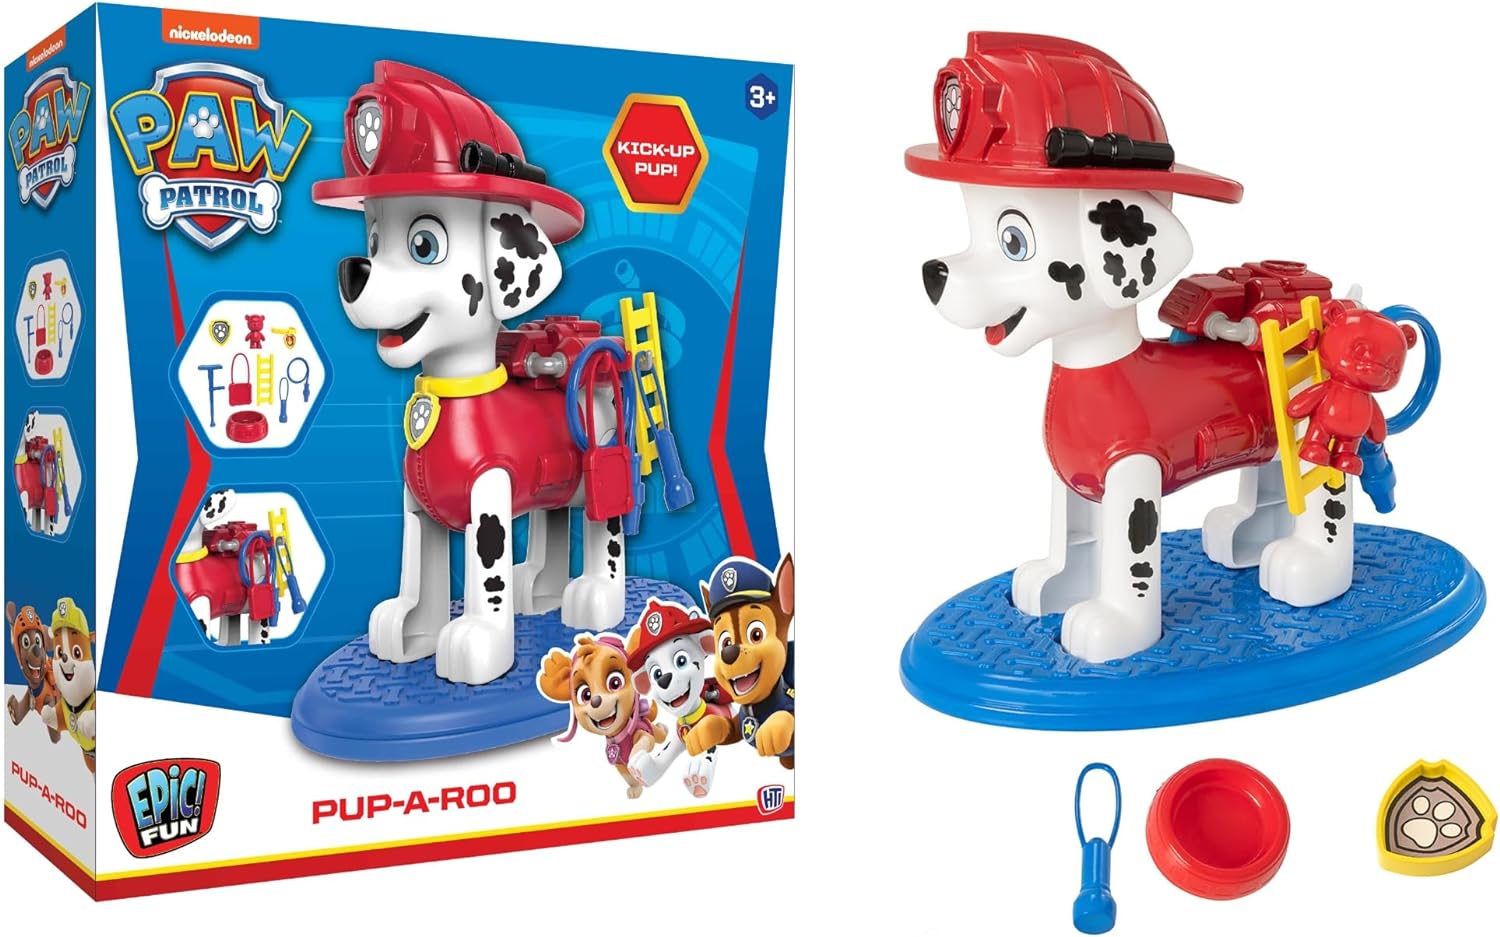 Paw Patrol Load Up Pup Board Game